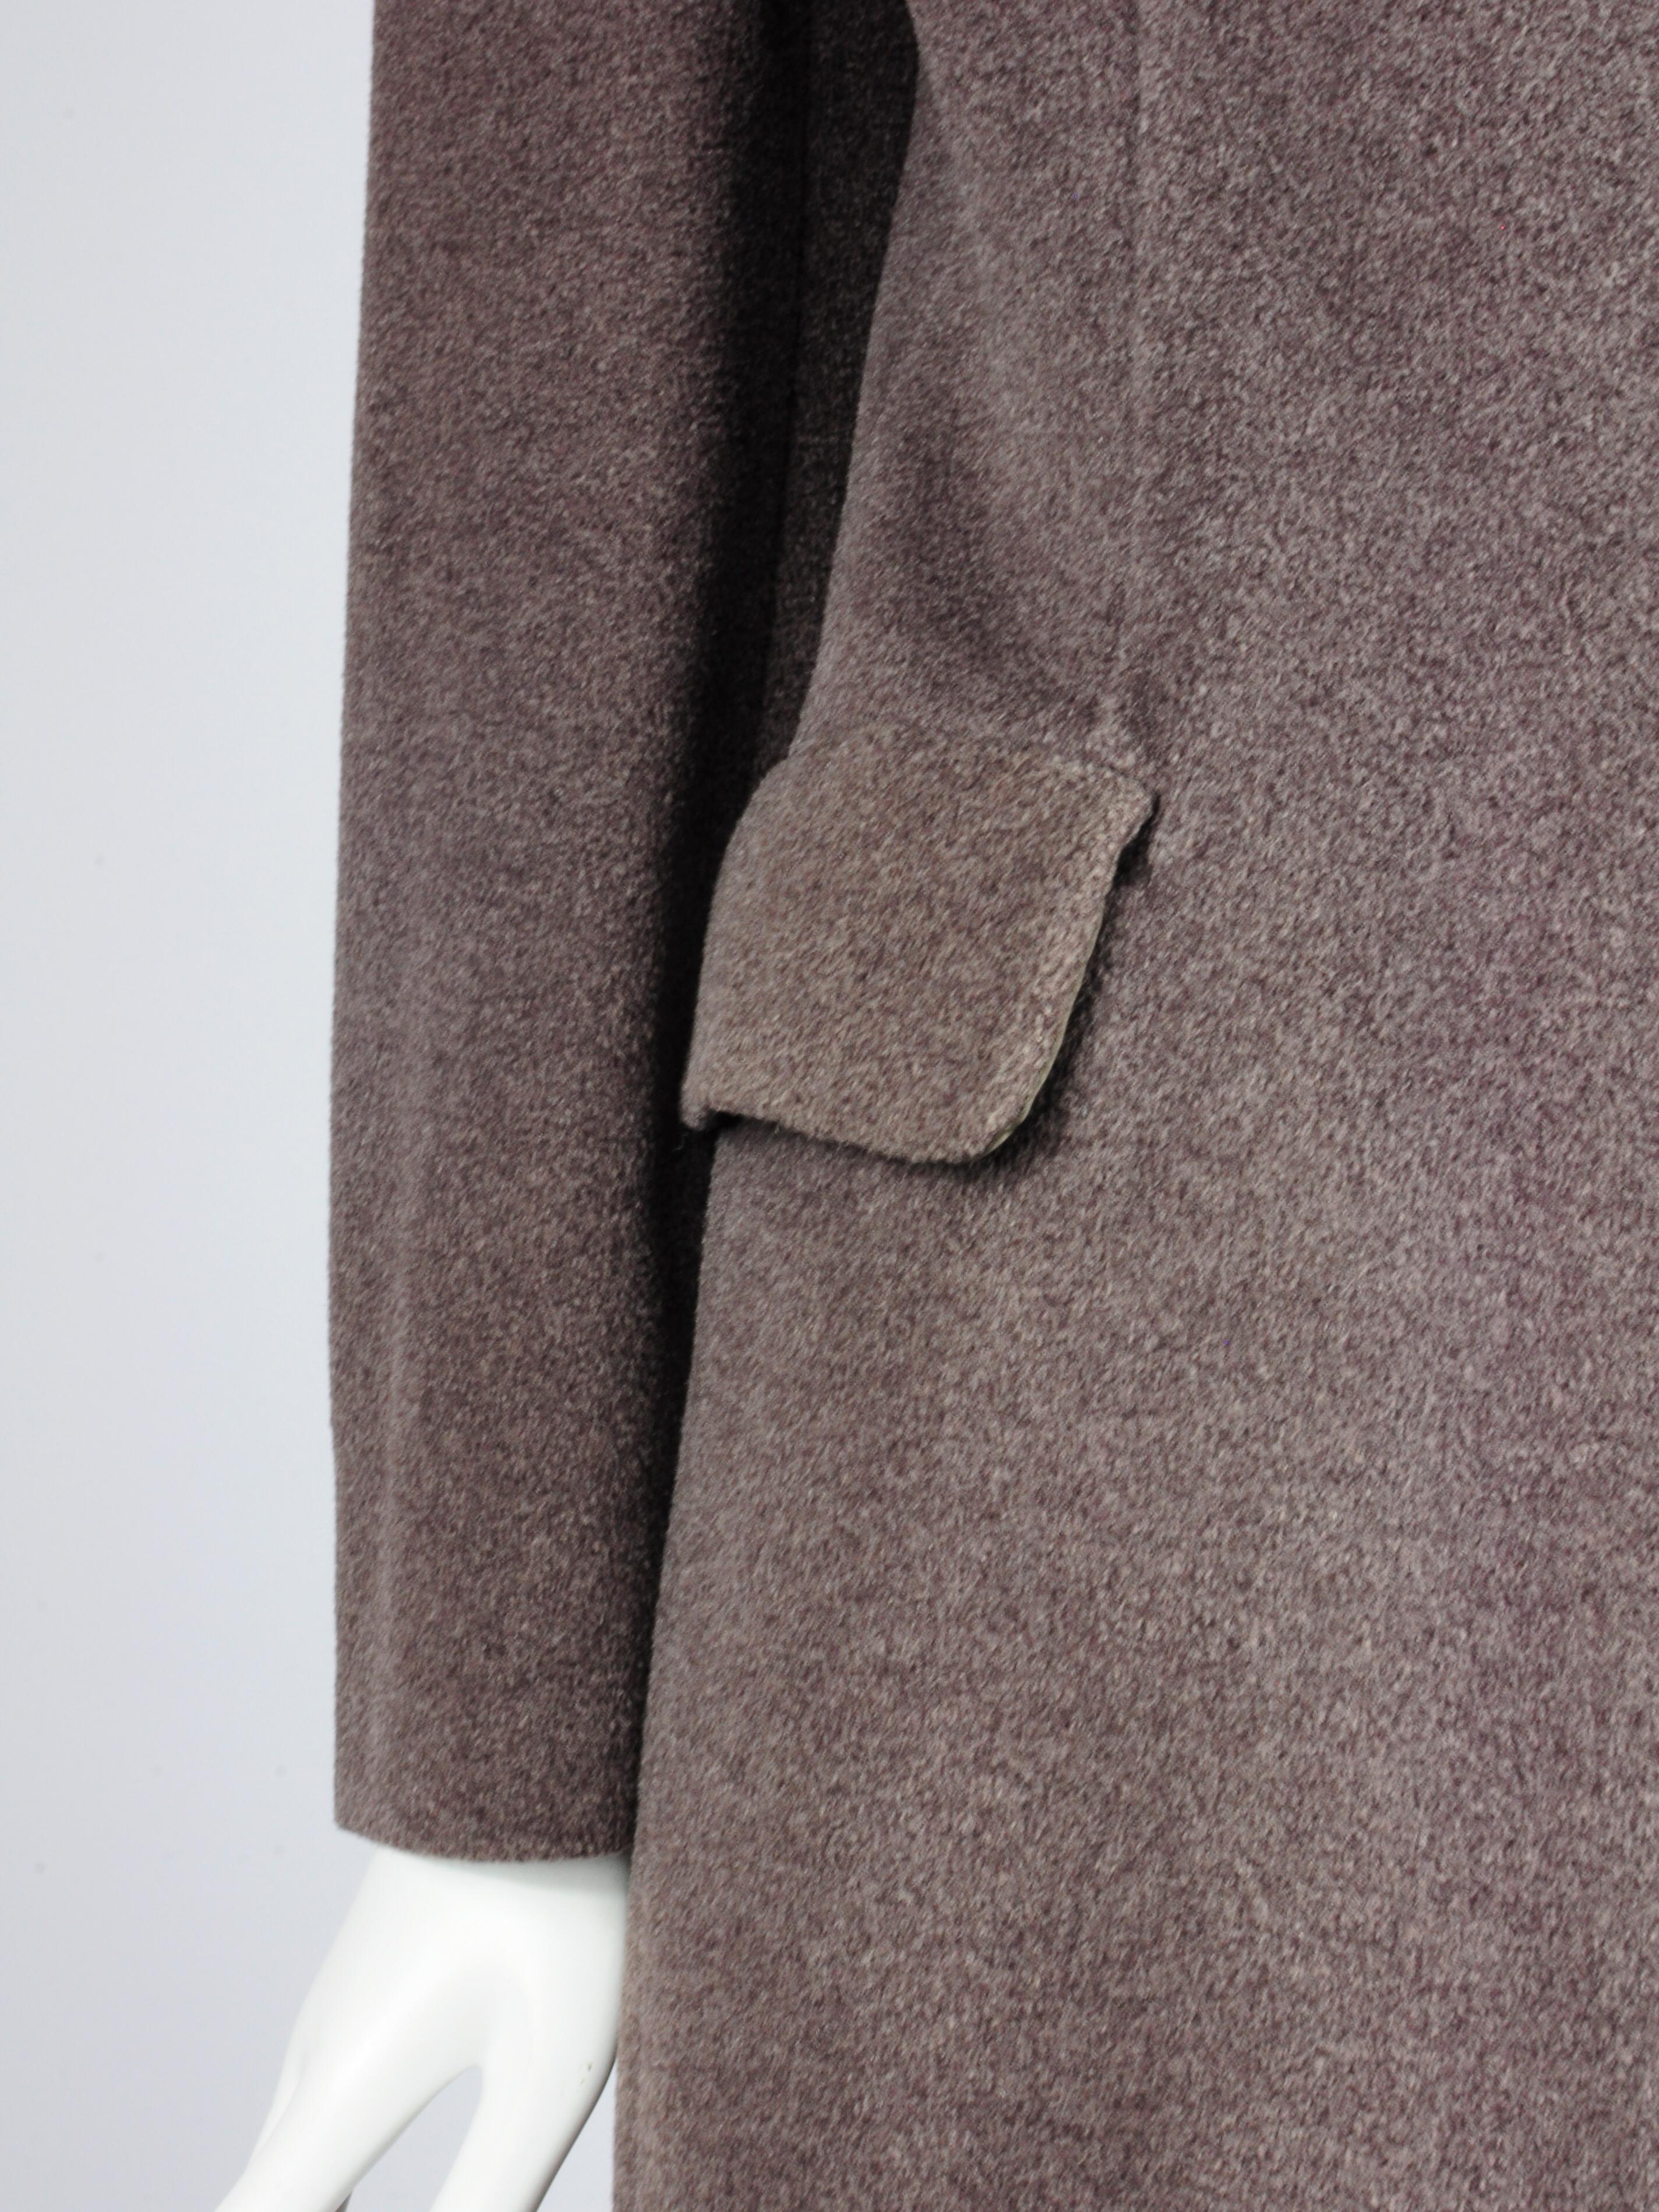 Max Mara Brown Coat Single Breasted Wool and Silk 1990s For Sale 3